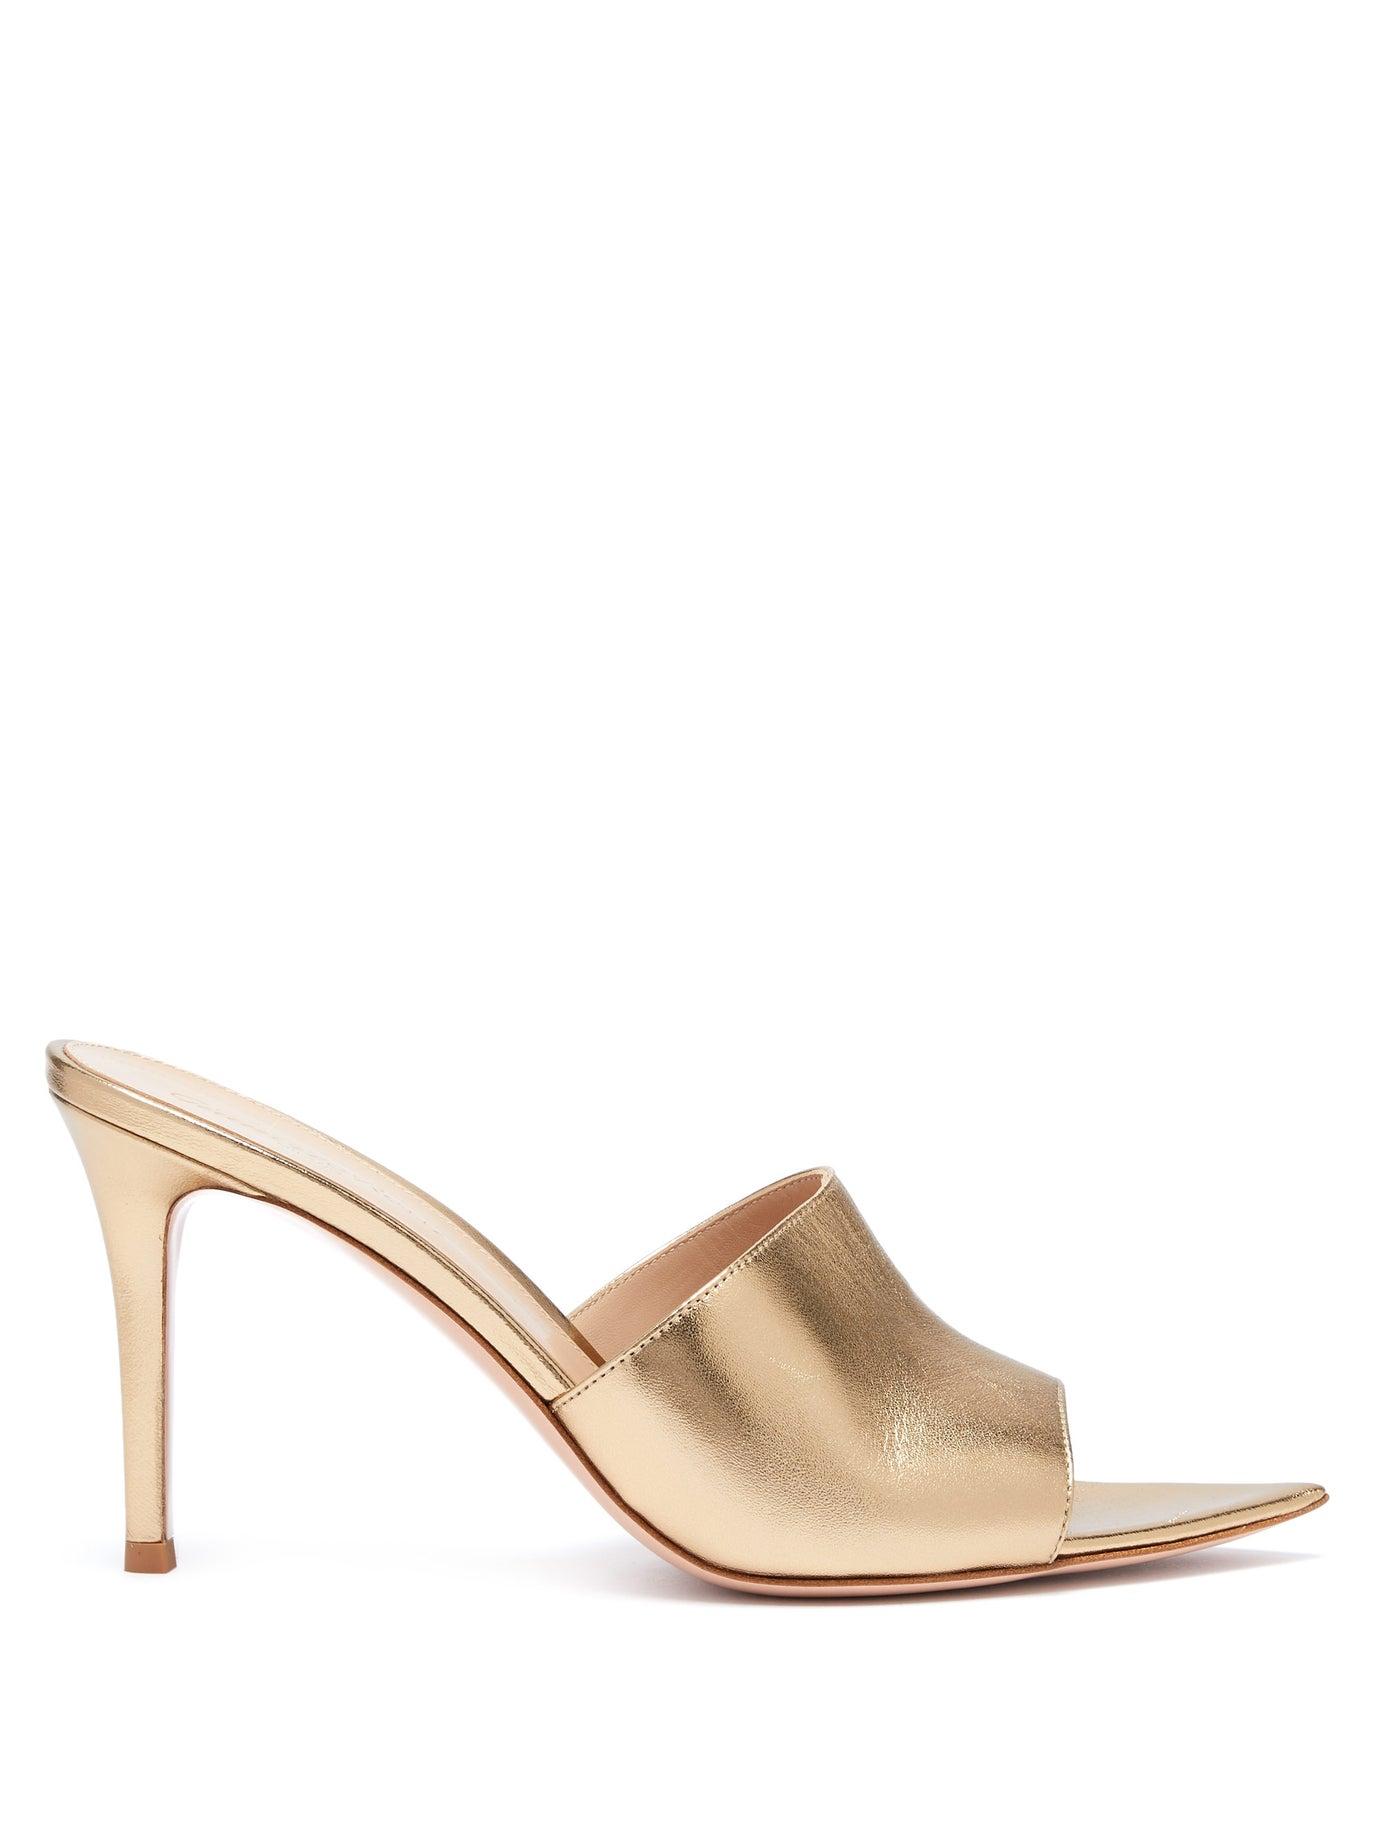 Gianvito Rossi Alise 85 Grained-leather Mules in Gold (Metallic) - Lyst